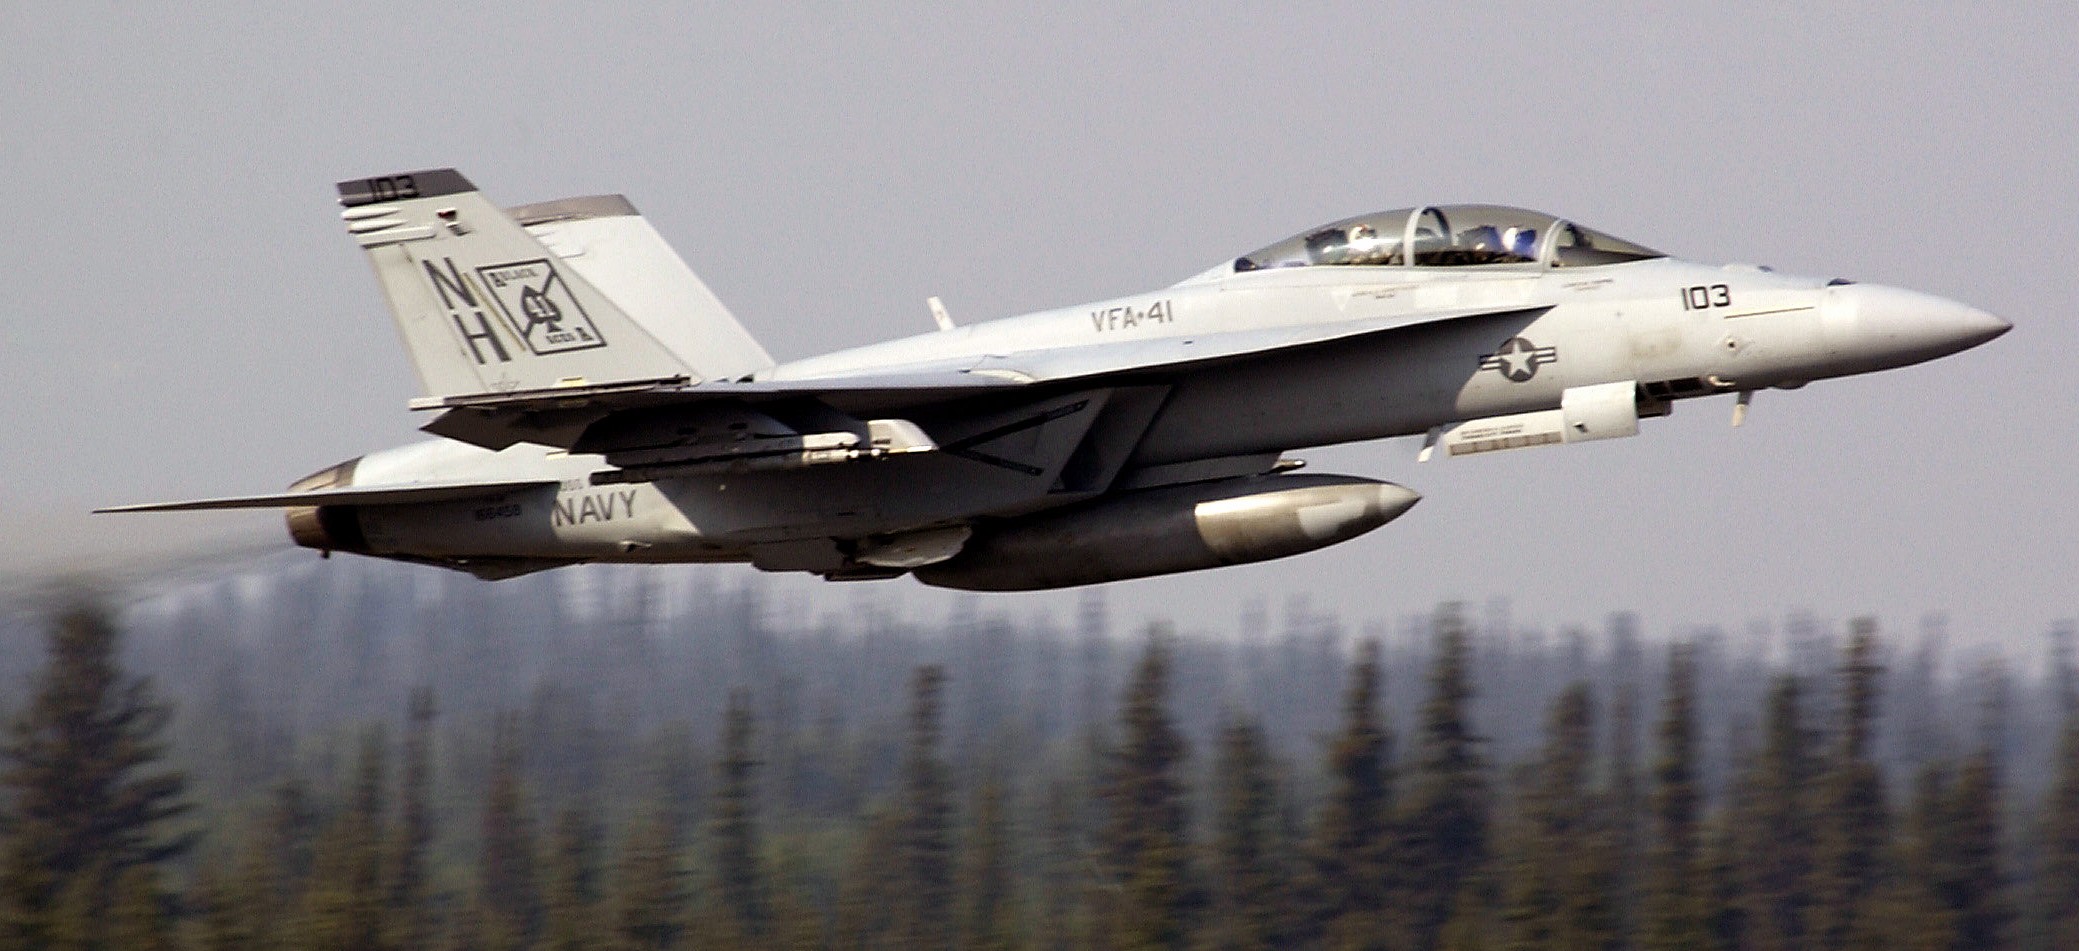 vfa-41 black aces strike fighter squadron f/a-18f super hornet exercise cooperative thunder 2004